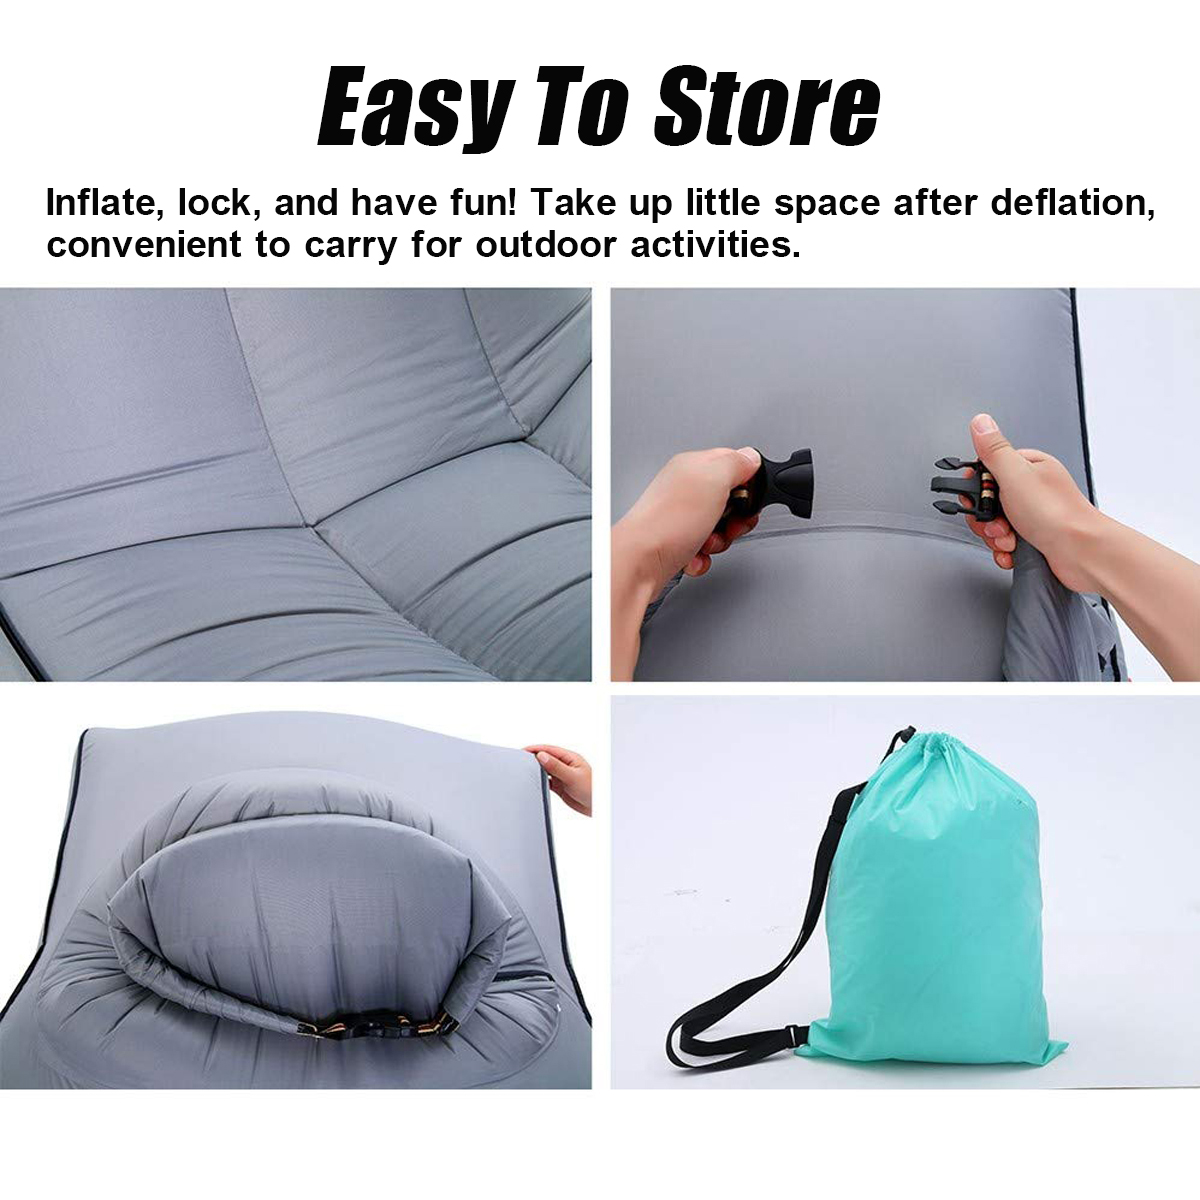 Outdoor Portable Inflatable Air Lazy Sofa Sleeping Rest Beach Seaside Couch Bed Camping Travel 8